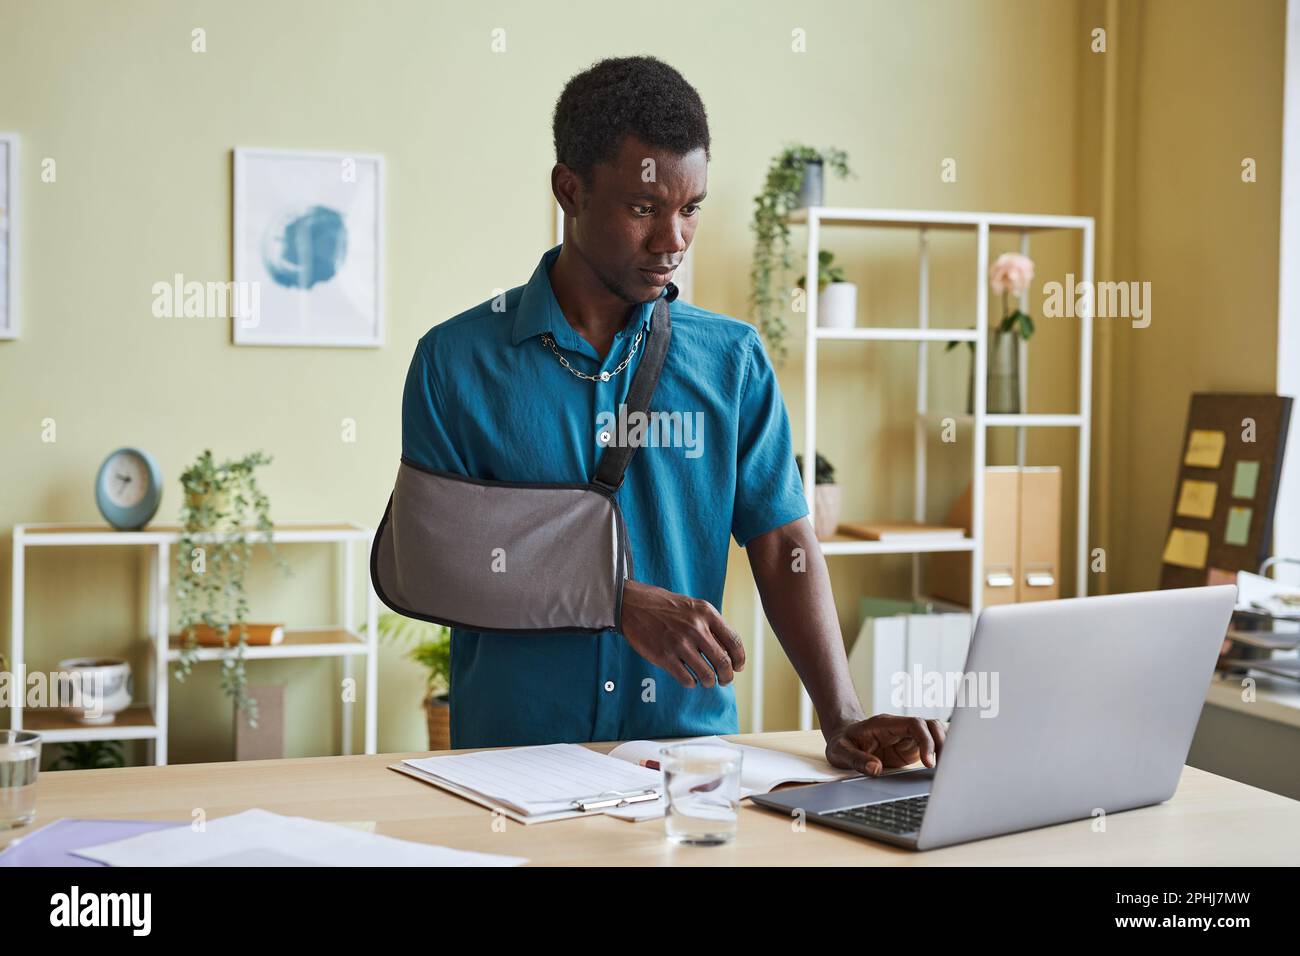 Portrait of black young man with arm sling working at standing desk and using laptop in office Stock Photo